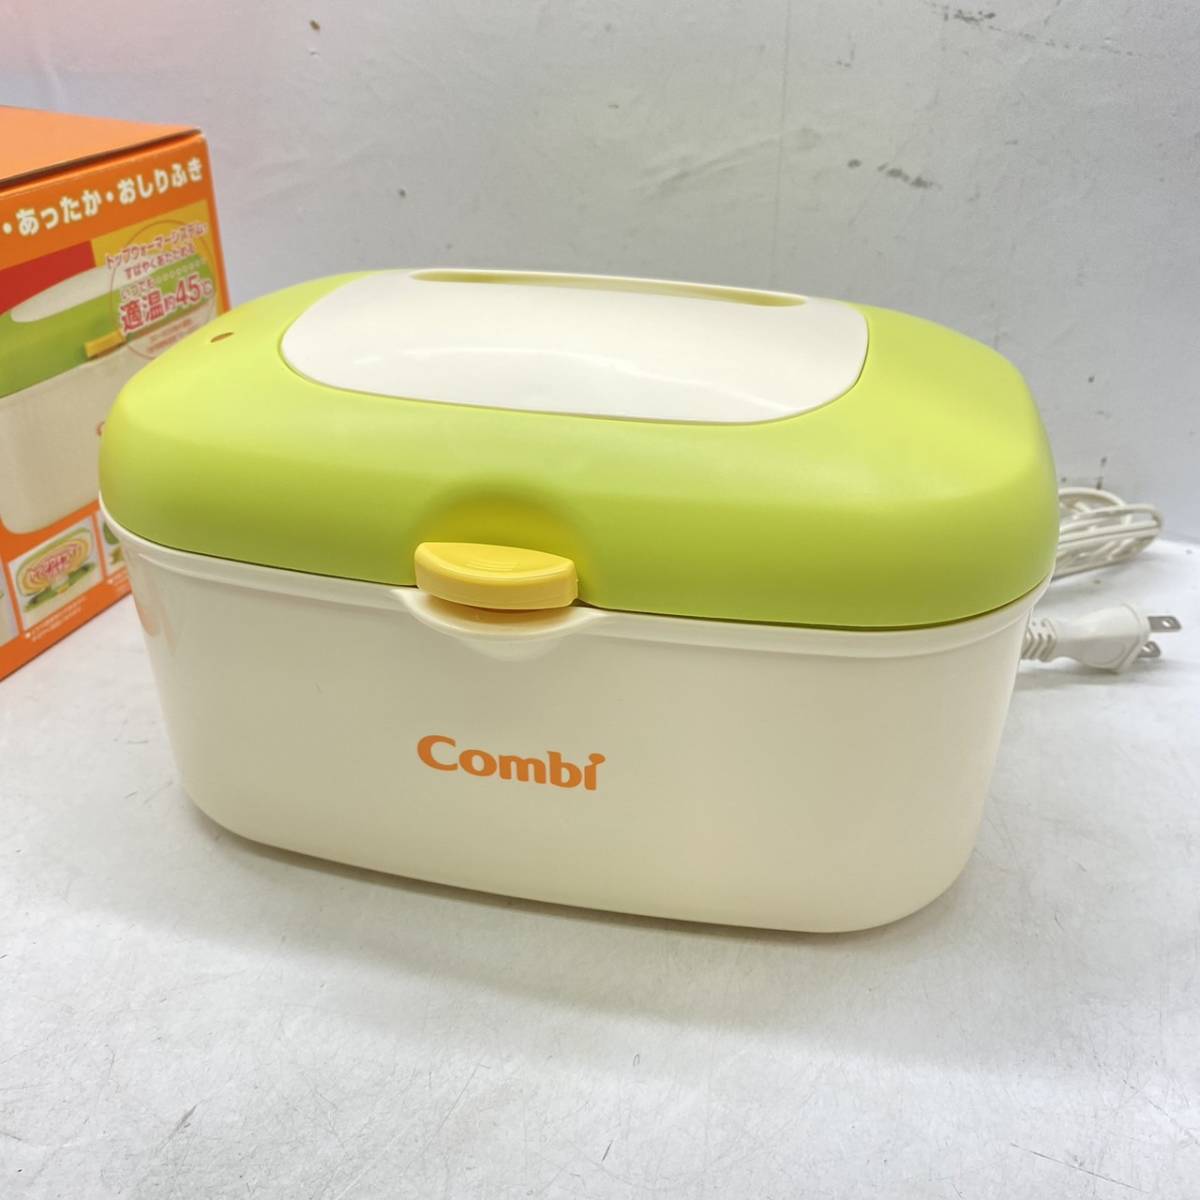  free shipping g26478 combination combi Quick warmer HU..... temperature . vessel goods for baby baby supplies .. therefore vessel corresponding 45°